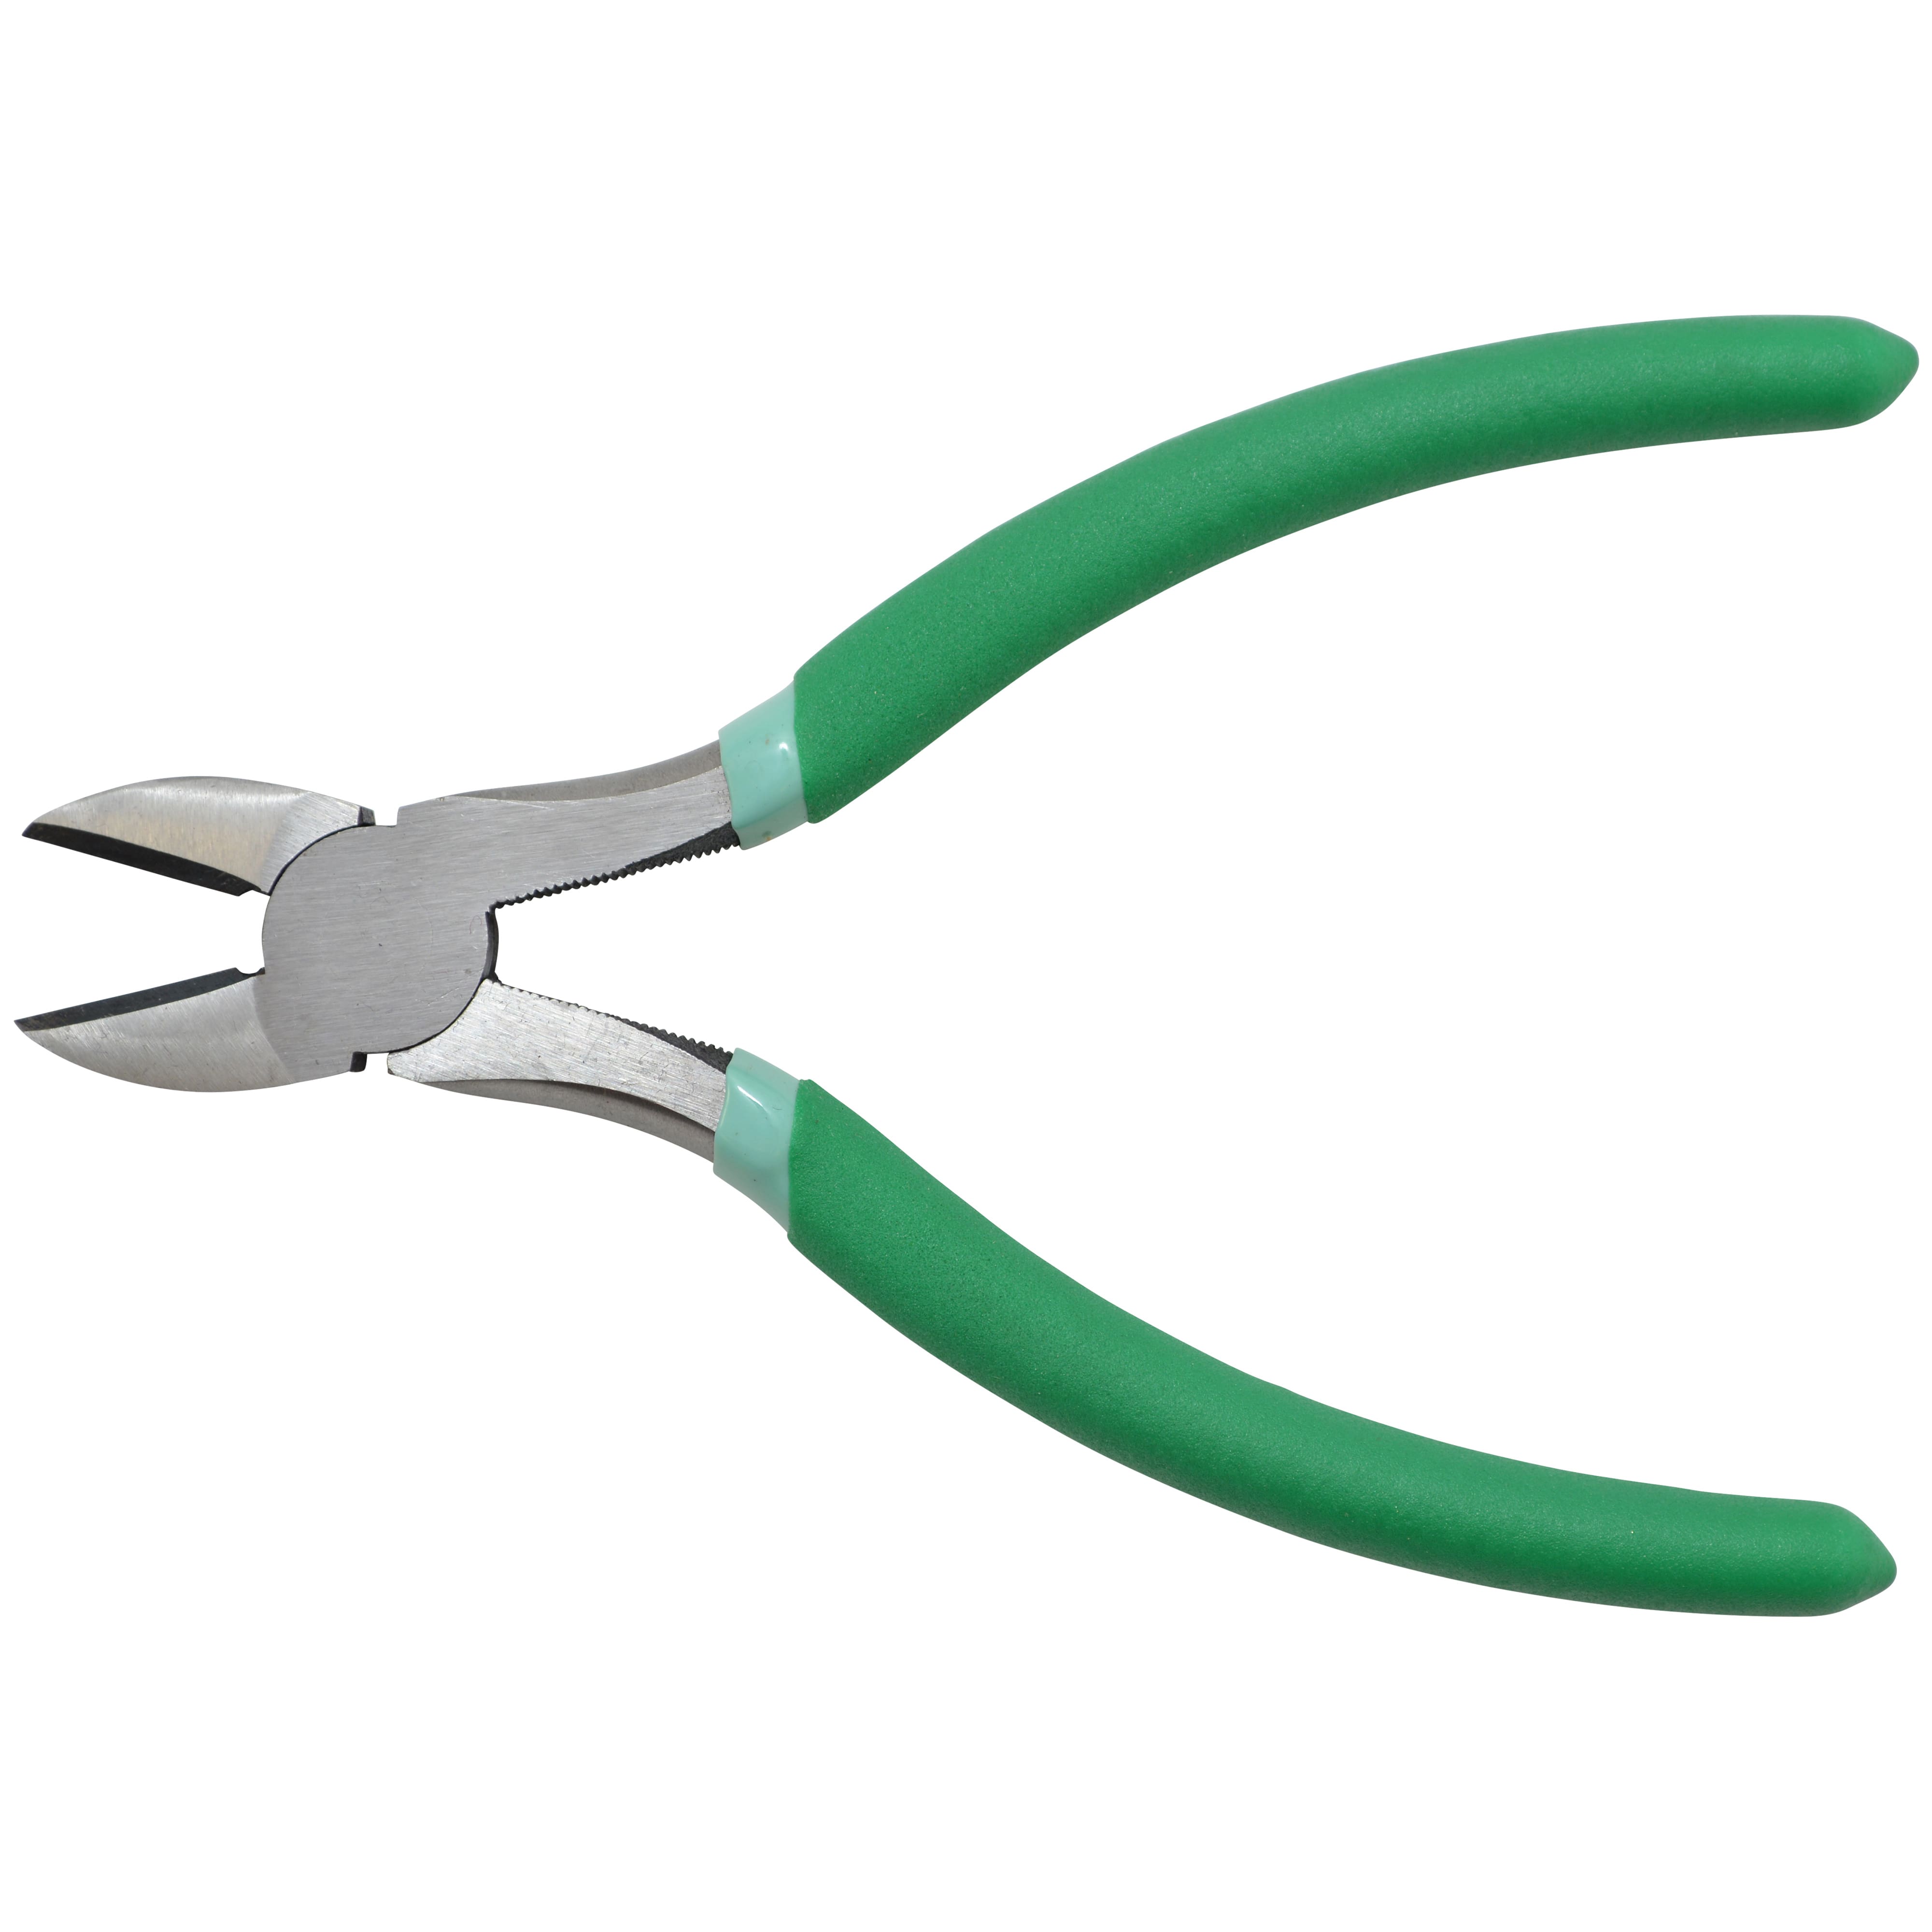 Wire Flush Cutters, Duogalia 2PC 6-inch Zip Tie Cutters for Cable Tie,  Floral Wire Cutters for Artificial Flowers, Wire Cutters for Crafts and  Guitar